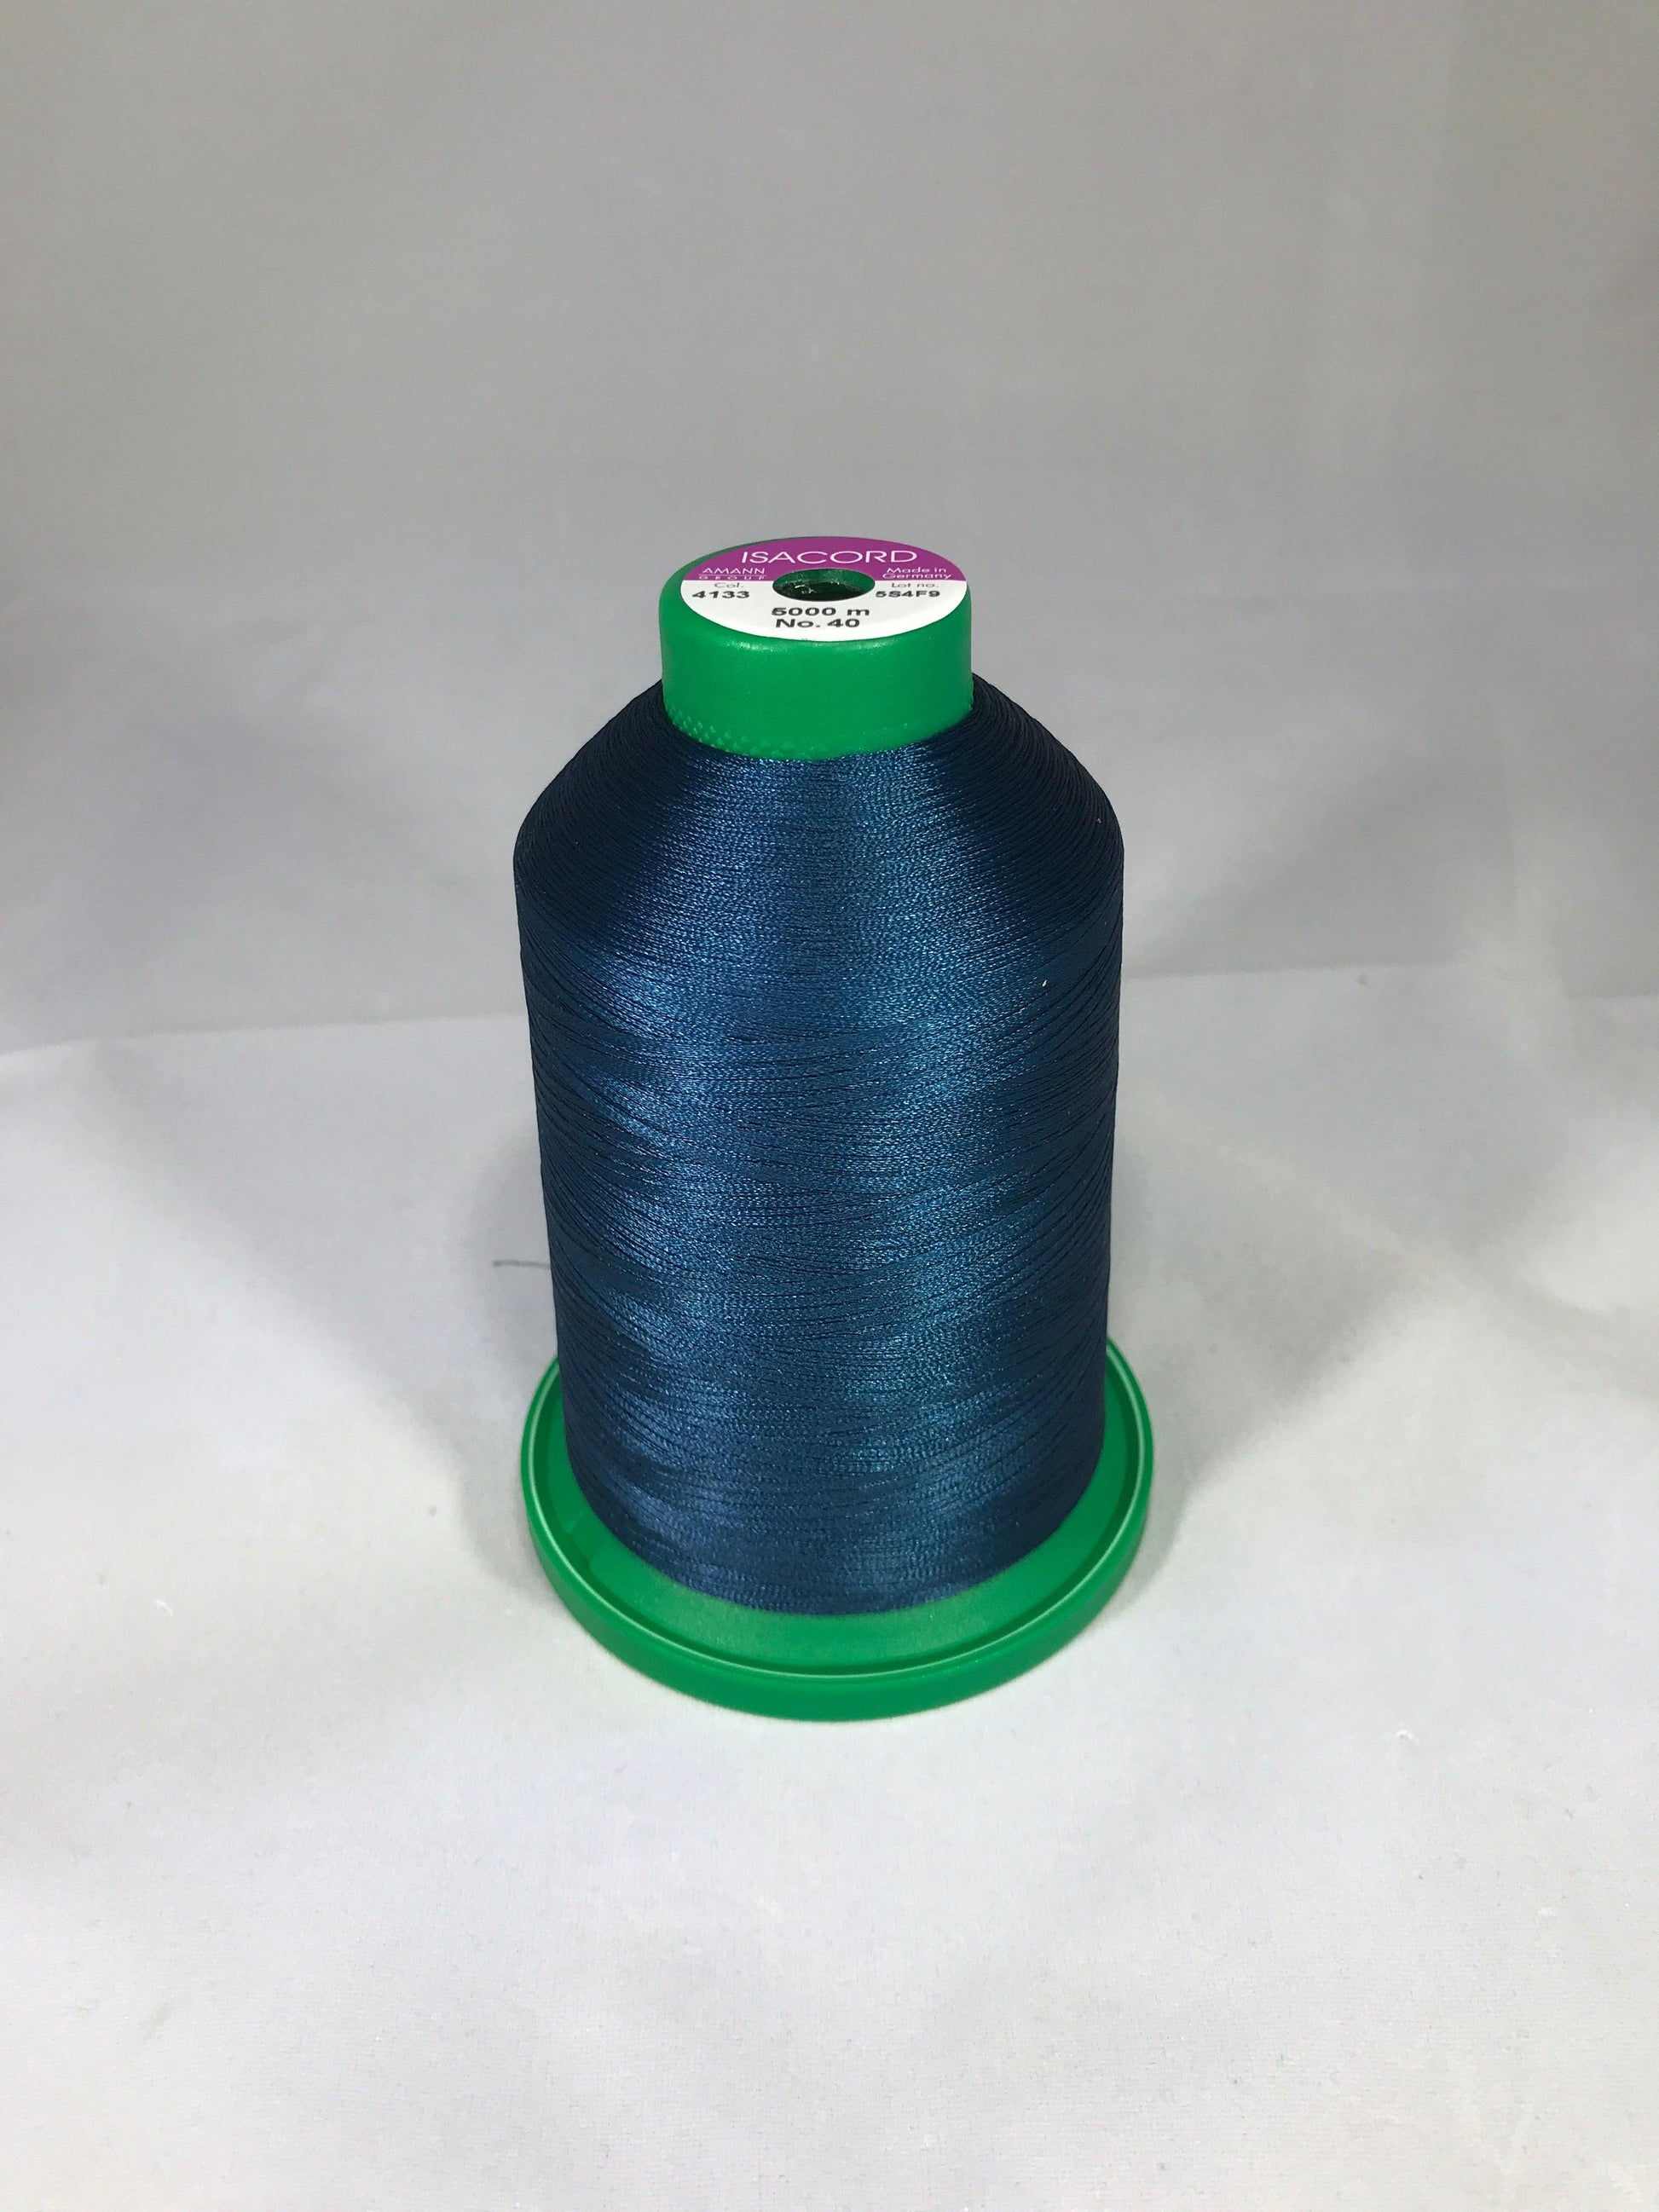 300 cones 5000m Red, White, Black embroidery thread